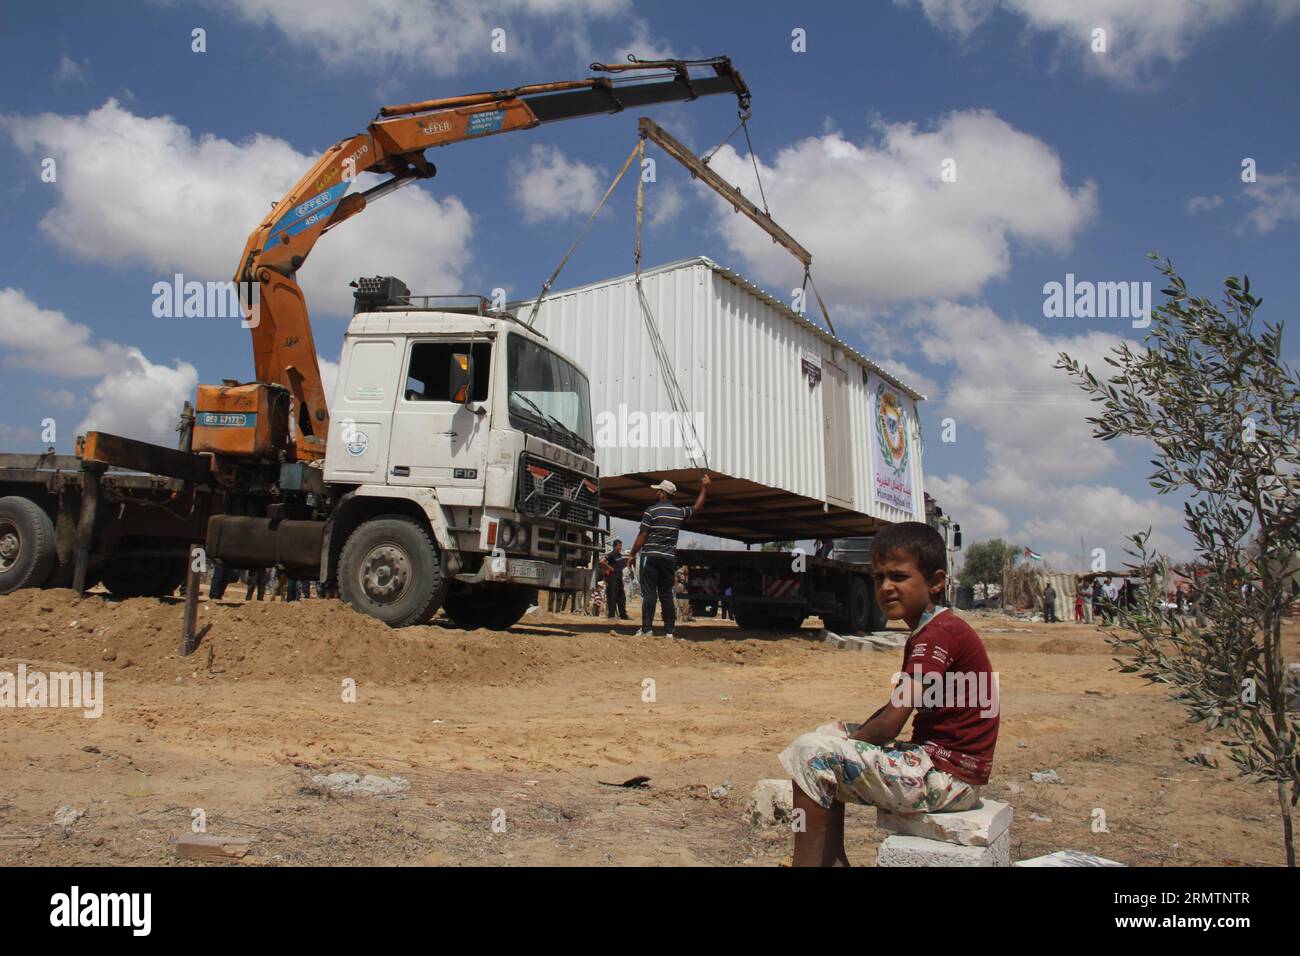 Mobile homes donated by an United Arab Emirates association are delivered to Palestinian families whose houses were destroyed by bombings during the Israeli offensive on the Gaza Strip, in Khuzaa neighborhood in the southern Gaza Strip City of Khan Younis, on Sept. 13, 2014. Some 60,000 homes were impacted during the 50-day Israeli offensive, a third of which became uninhabitable. ) MIDEAST-GAZA-MOBILE HOMES KhaledxOmar PUBLICATIONxNOTxINxCHN   Mobile Homes Donated by to United Arab Emirates Association are delivered to PALESTINIAN families whose Houses Were destroyed by bombings during The Is Stock Photo